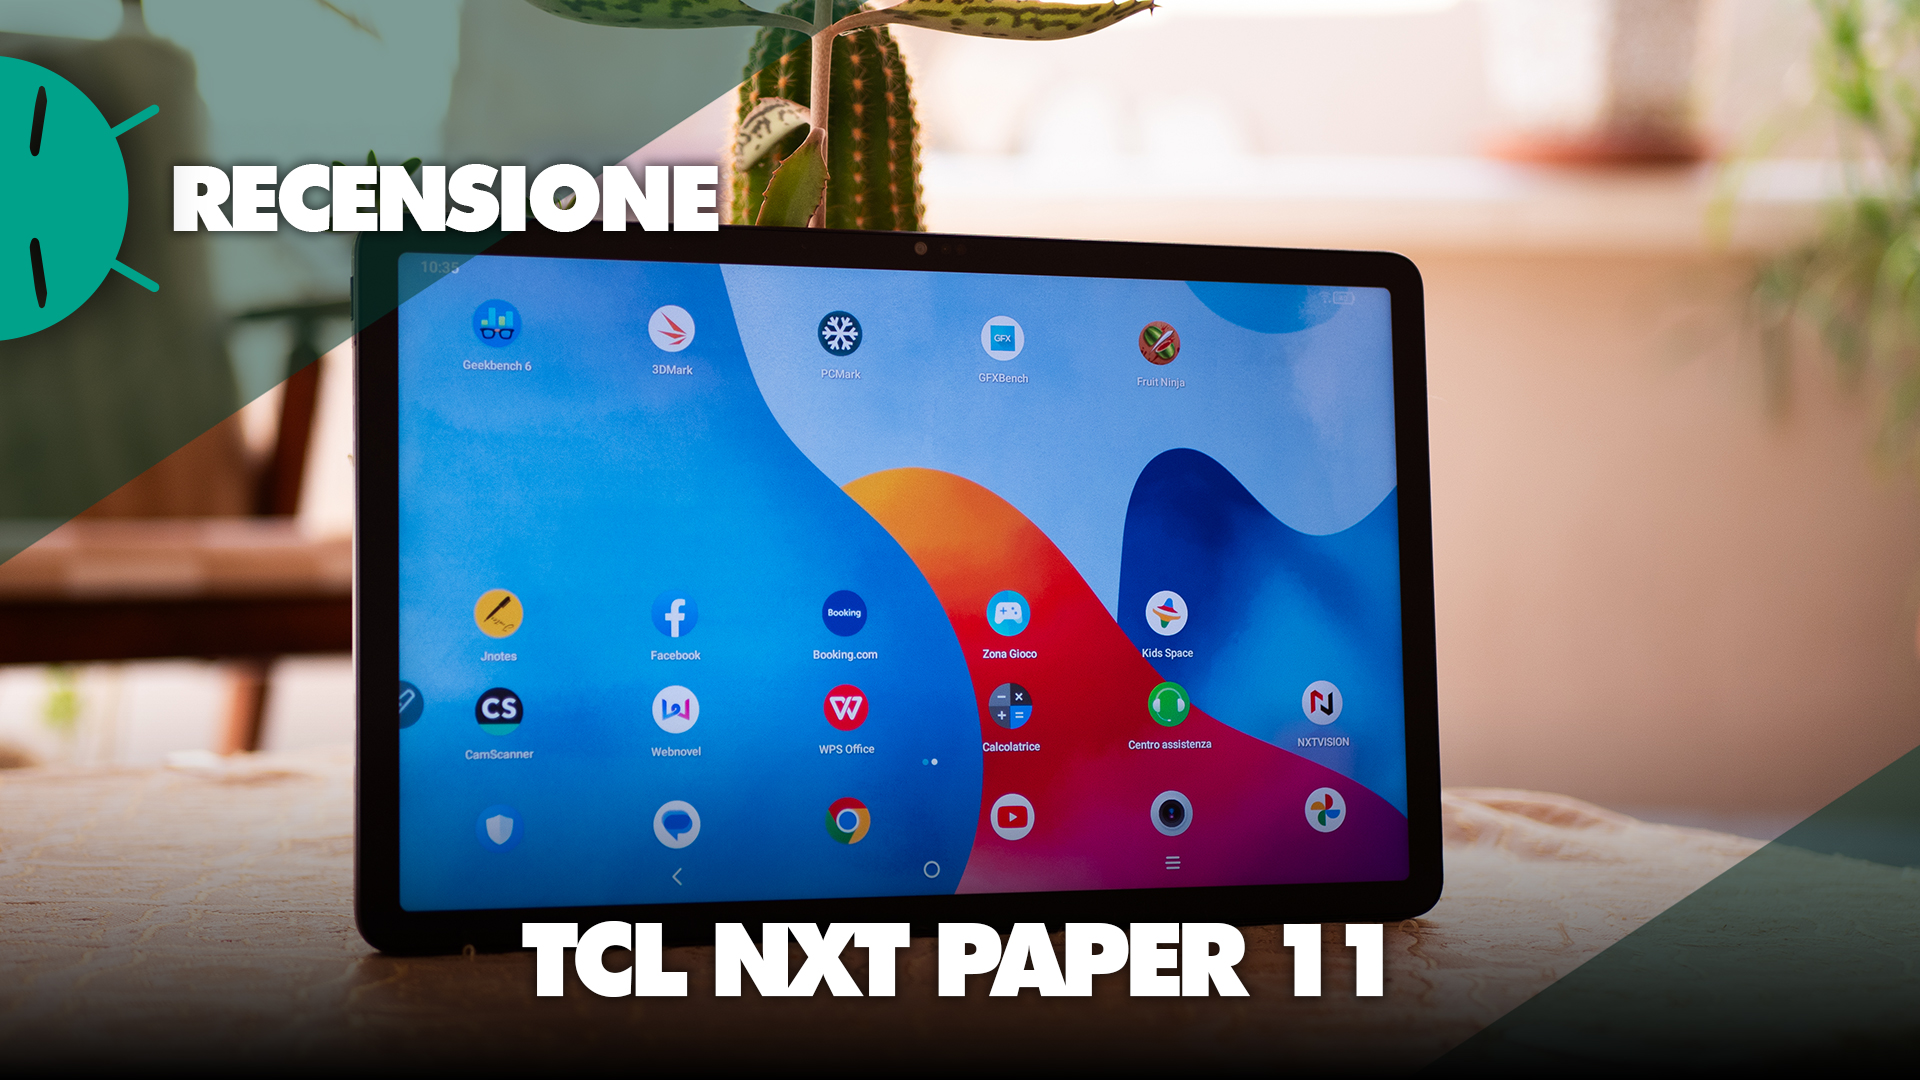 TCL NXTPAPER 11 review: the display alone is WORTH THE BUY